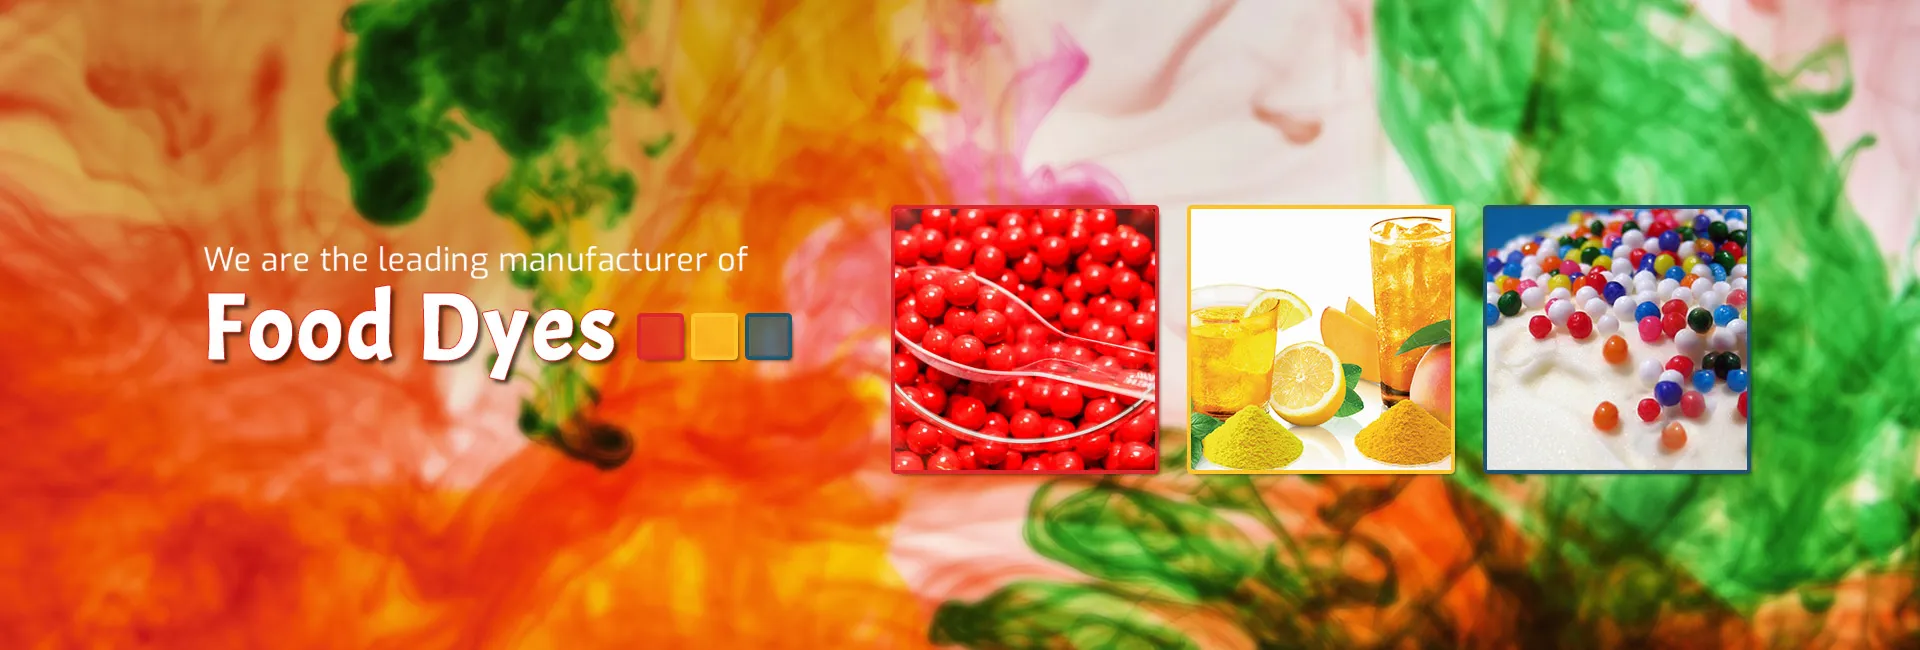 Food Dyes Manufacturer & Suppliers